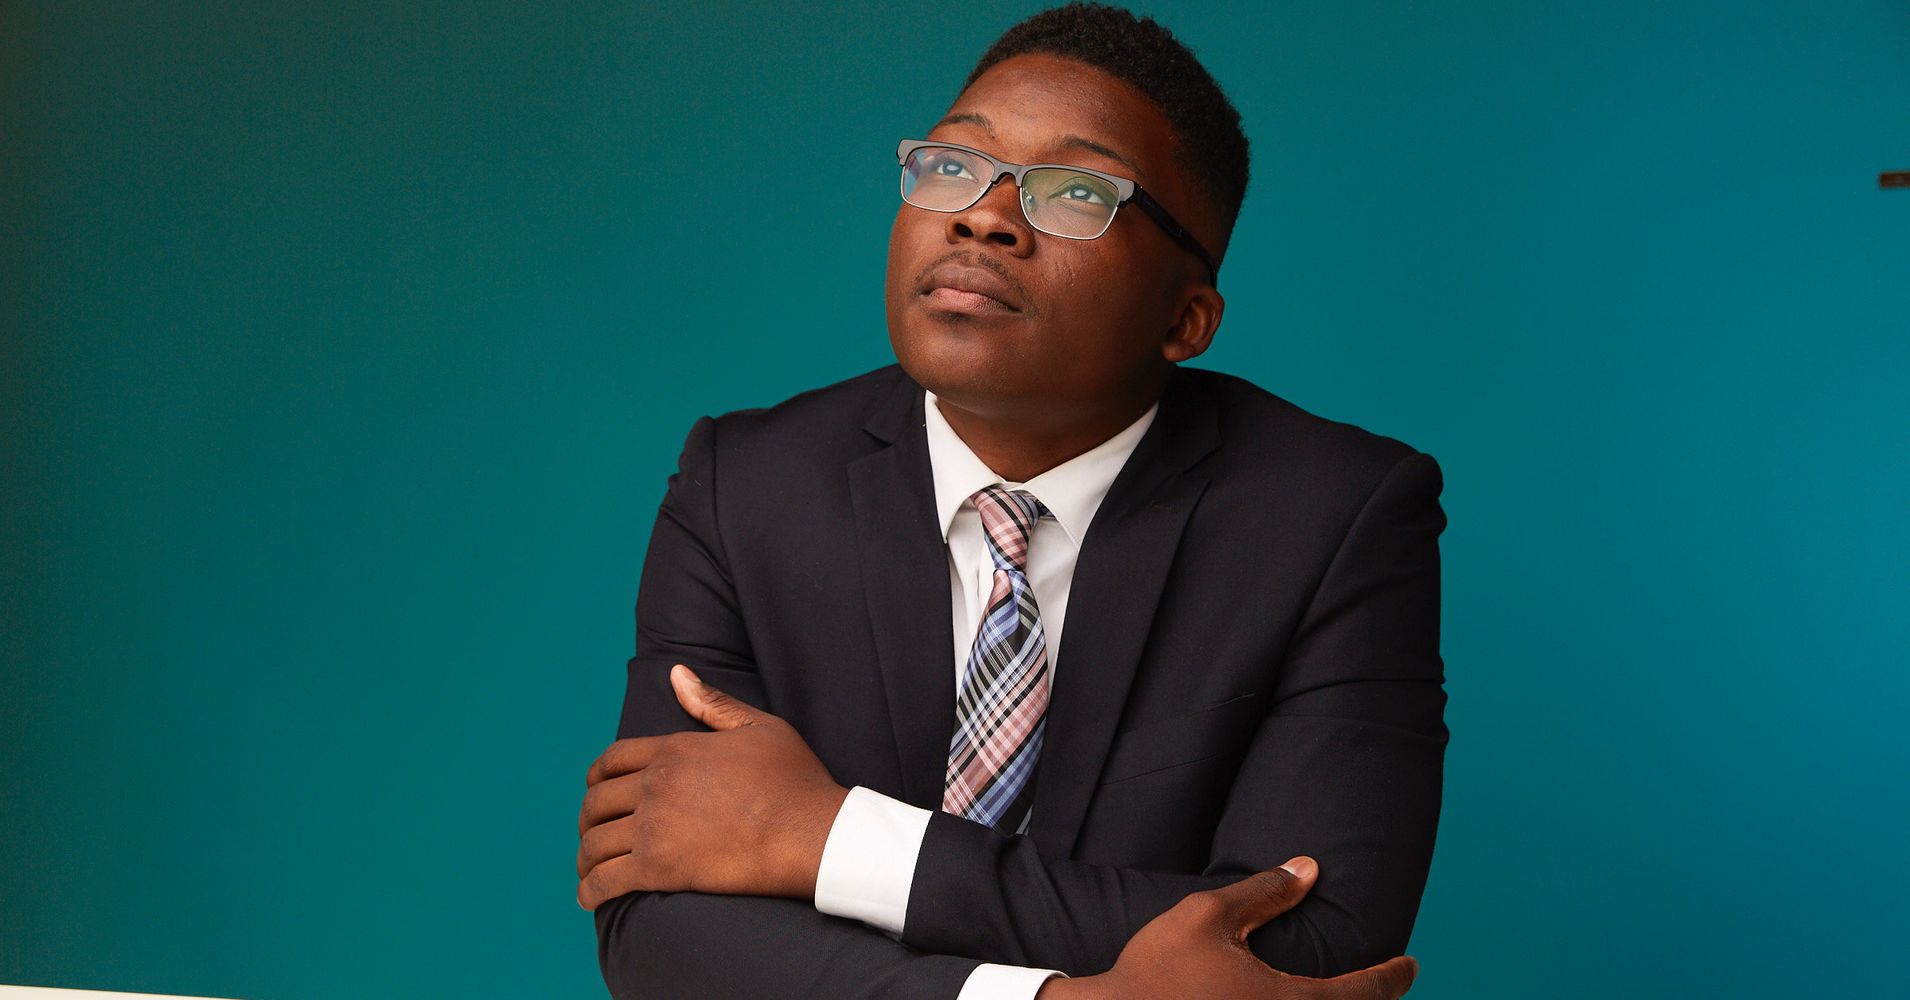 Can This 22-Year-Old Activist Become The Next Mayor Of Chicago? | HuffPost